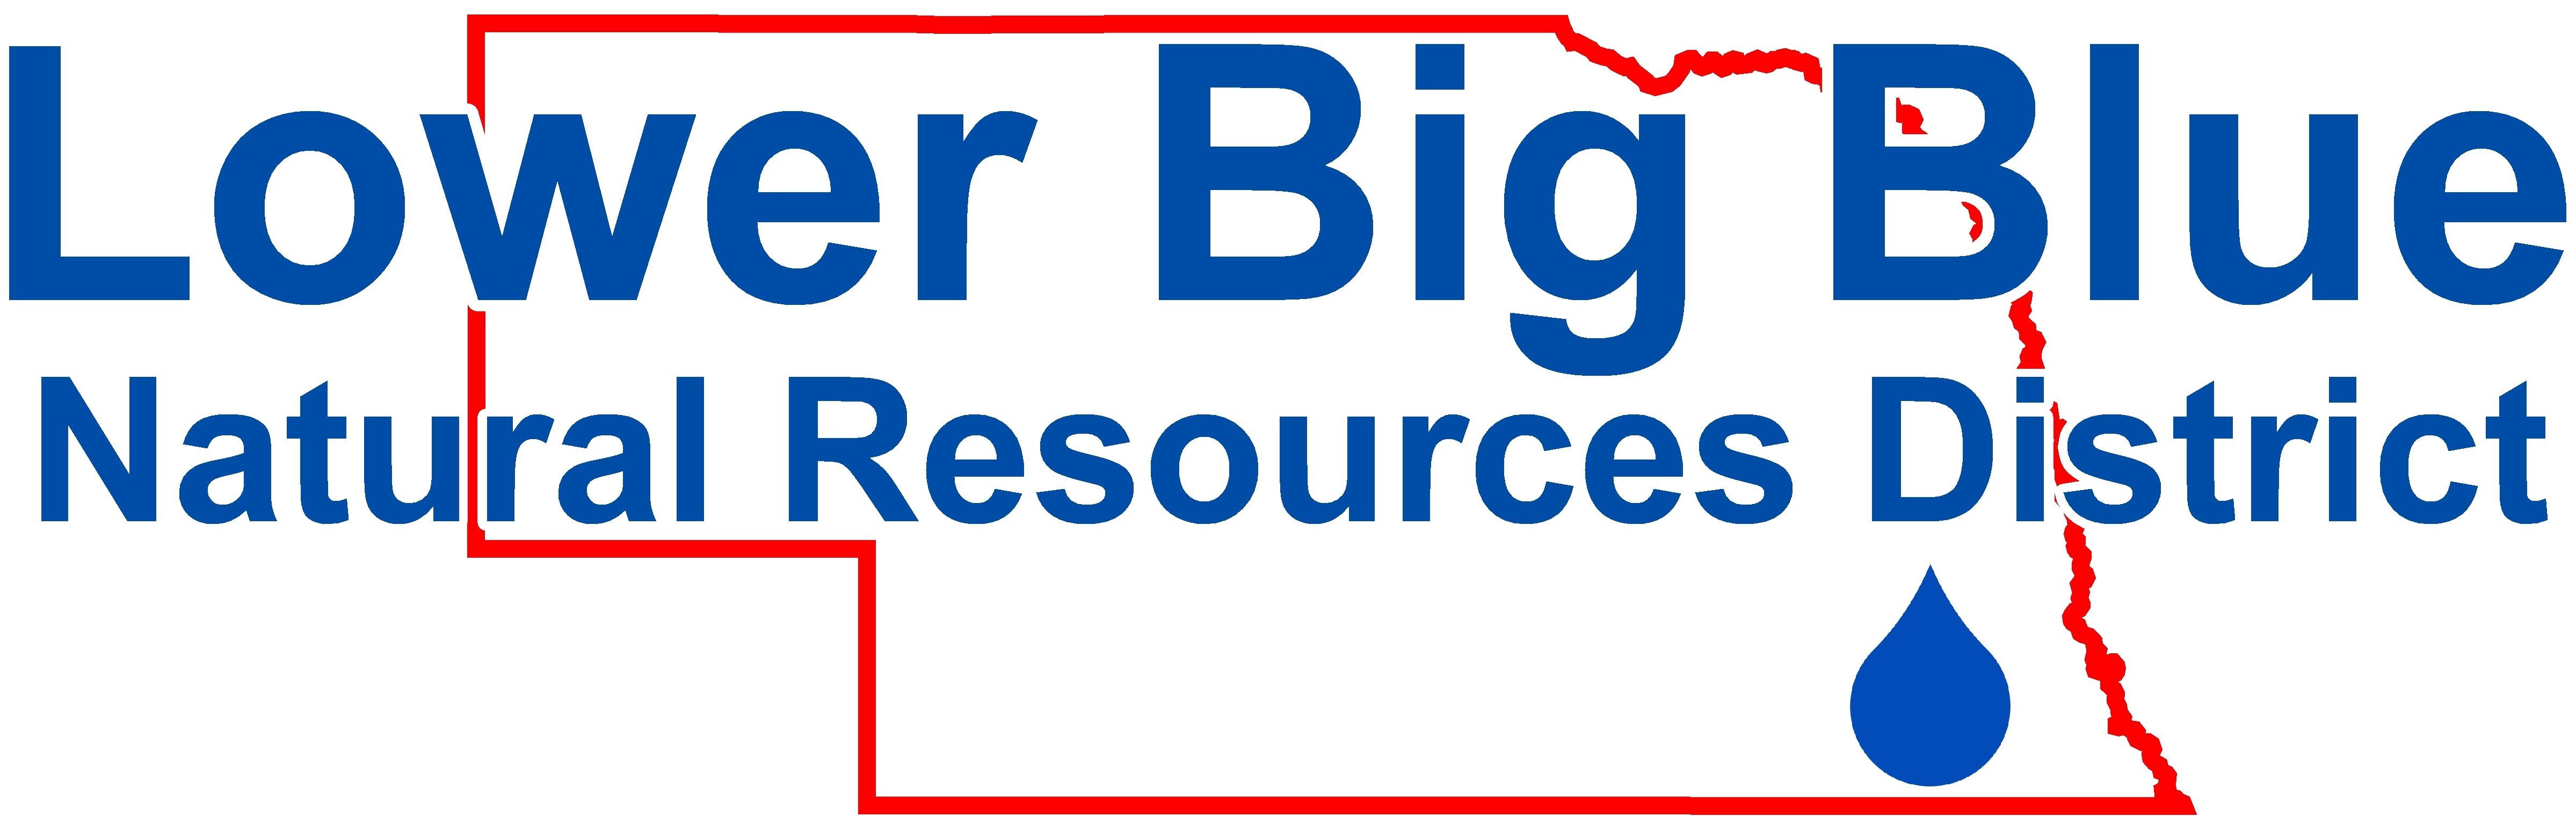 Lower Big Blue Natural Resources District